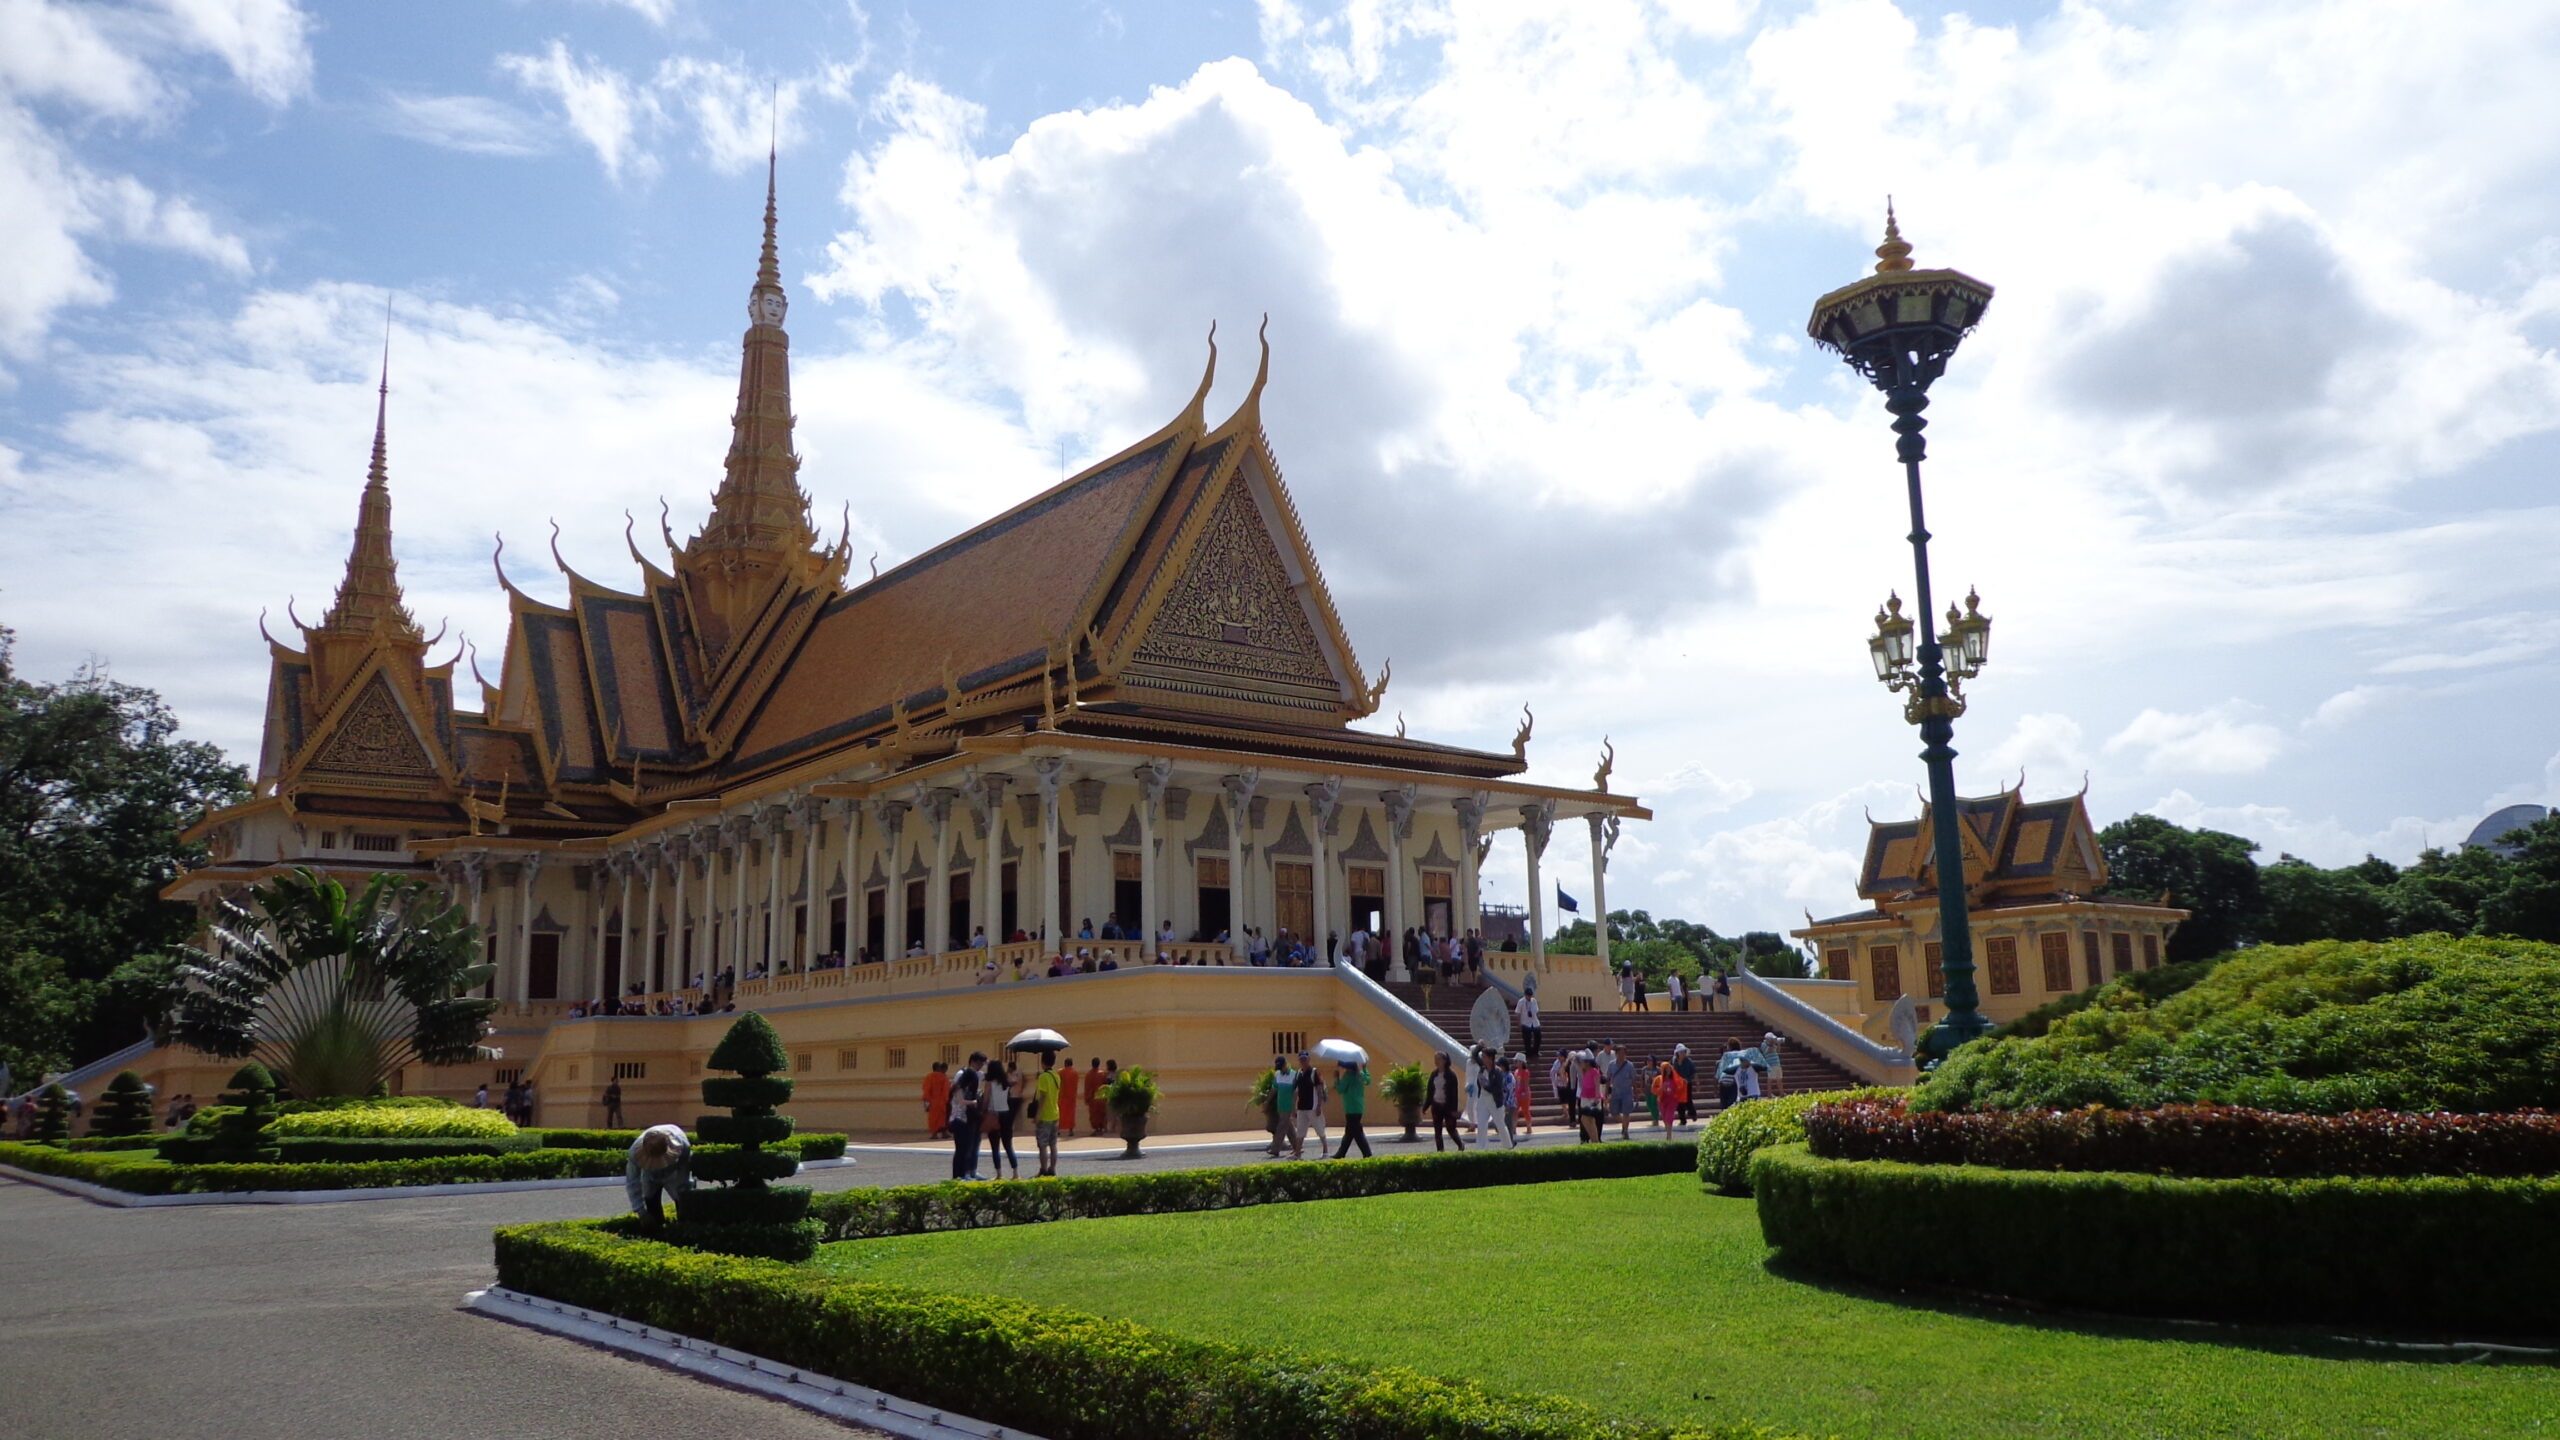 Planning a vacation to Cambodia? Here are some tips!